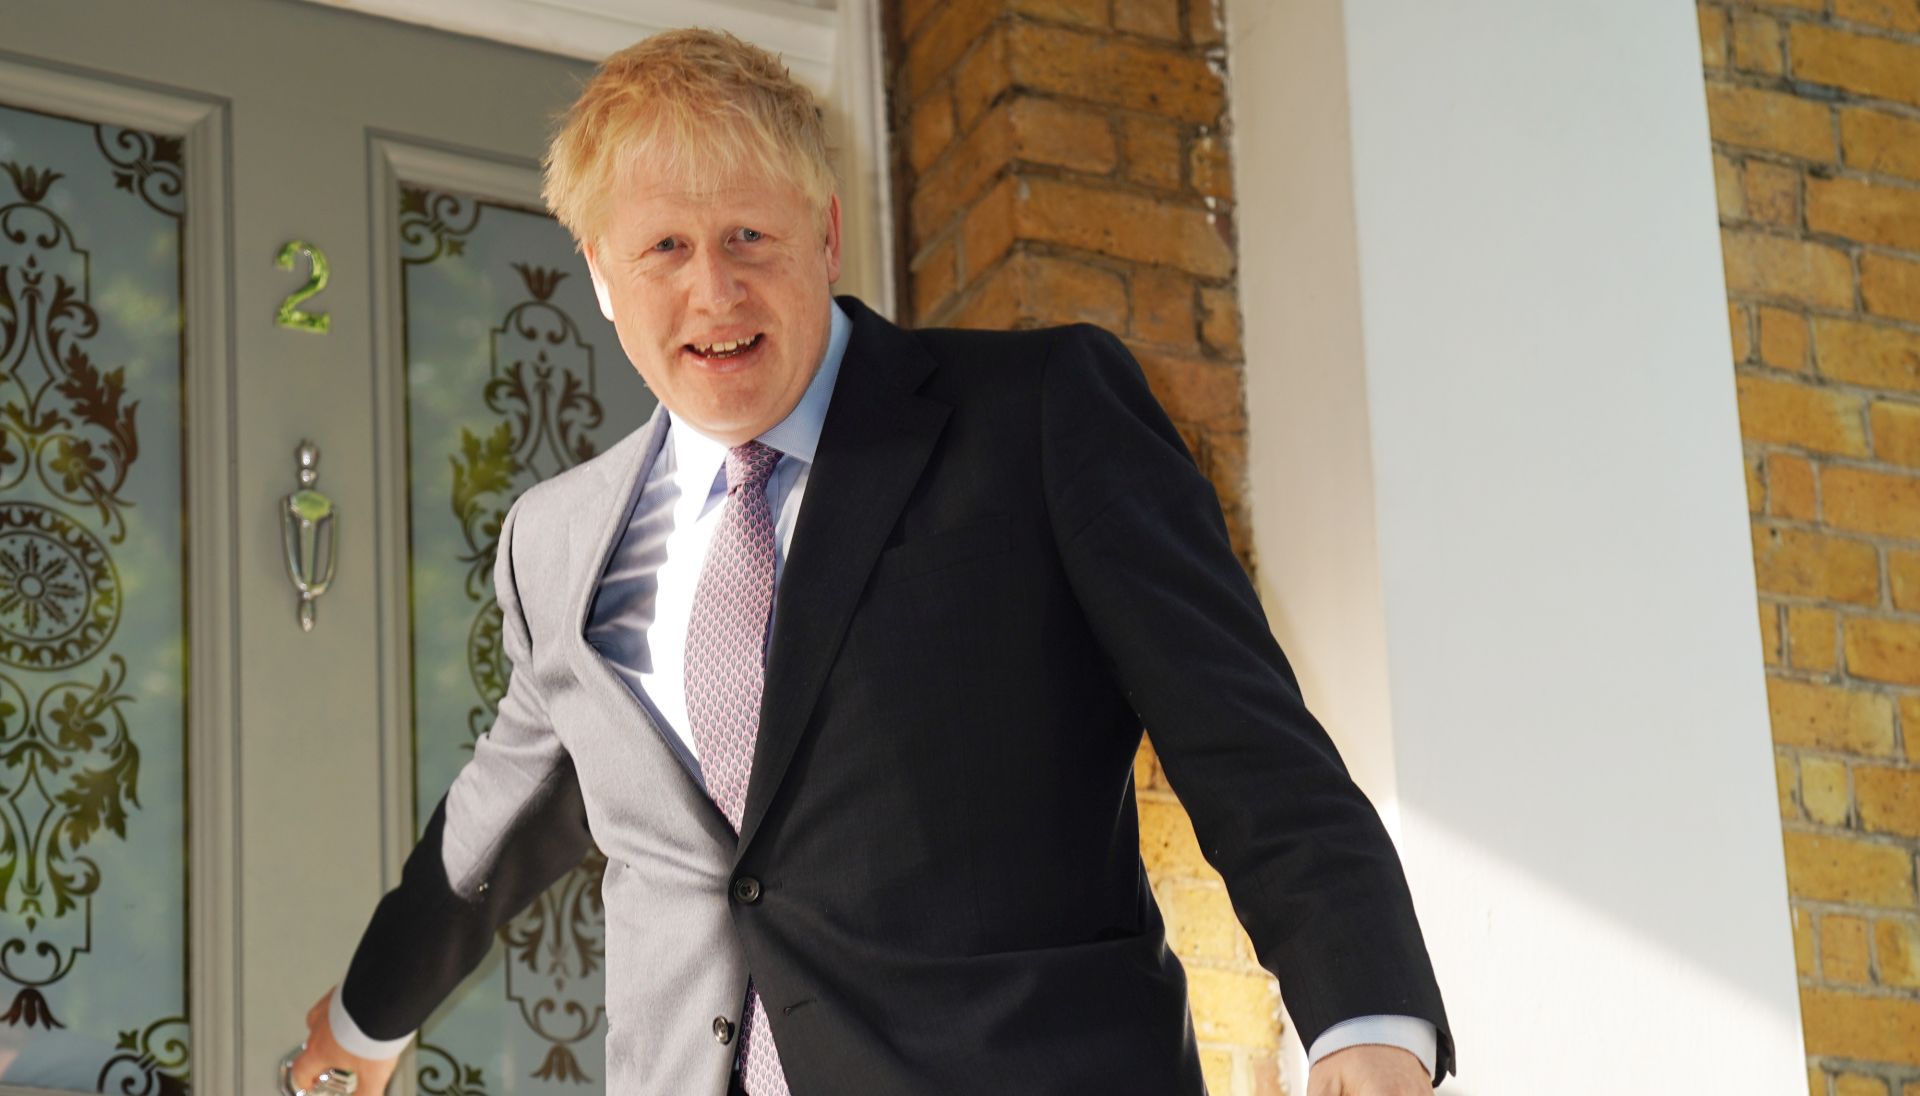 epa07654976 Conservative party leadership candidate Boris Johnson leaves his house in London, Britain, 18 June 2019. Johnson will appear in a BBC live debate among the remaining conservative candidates.  EPA/STRINGER